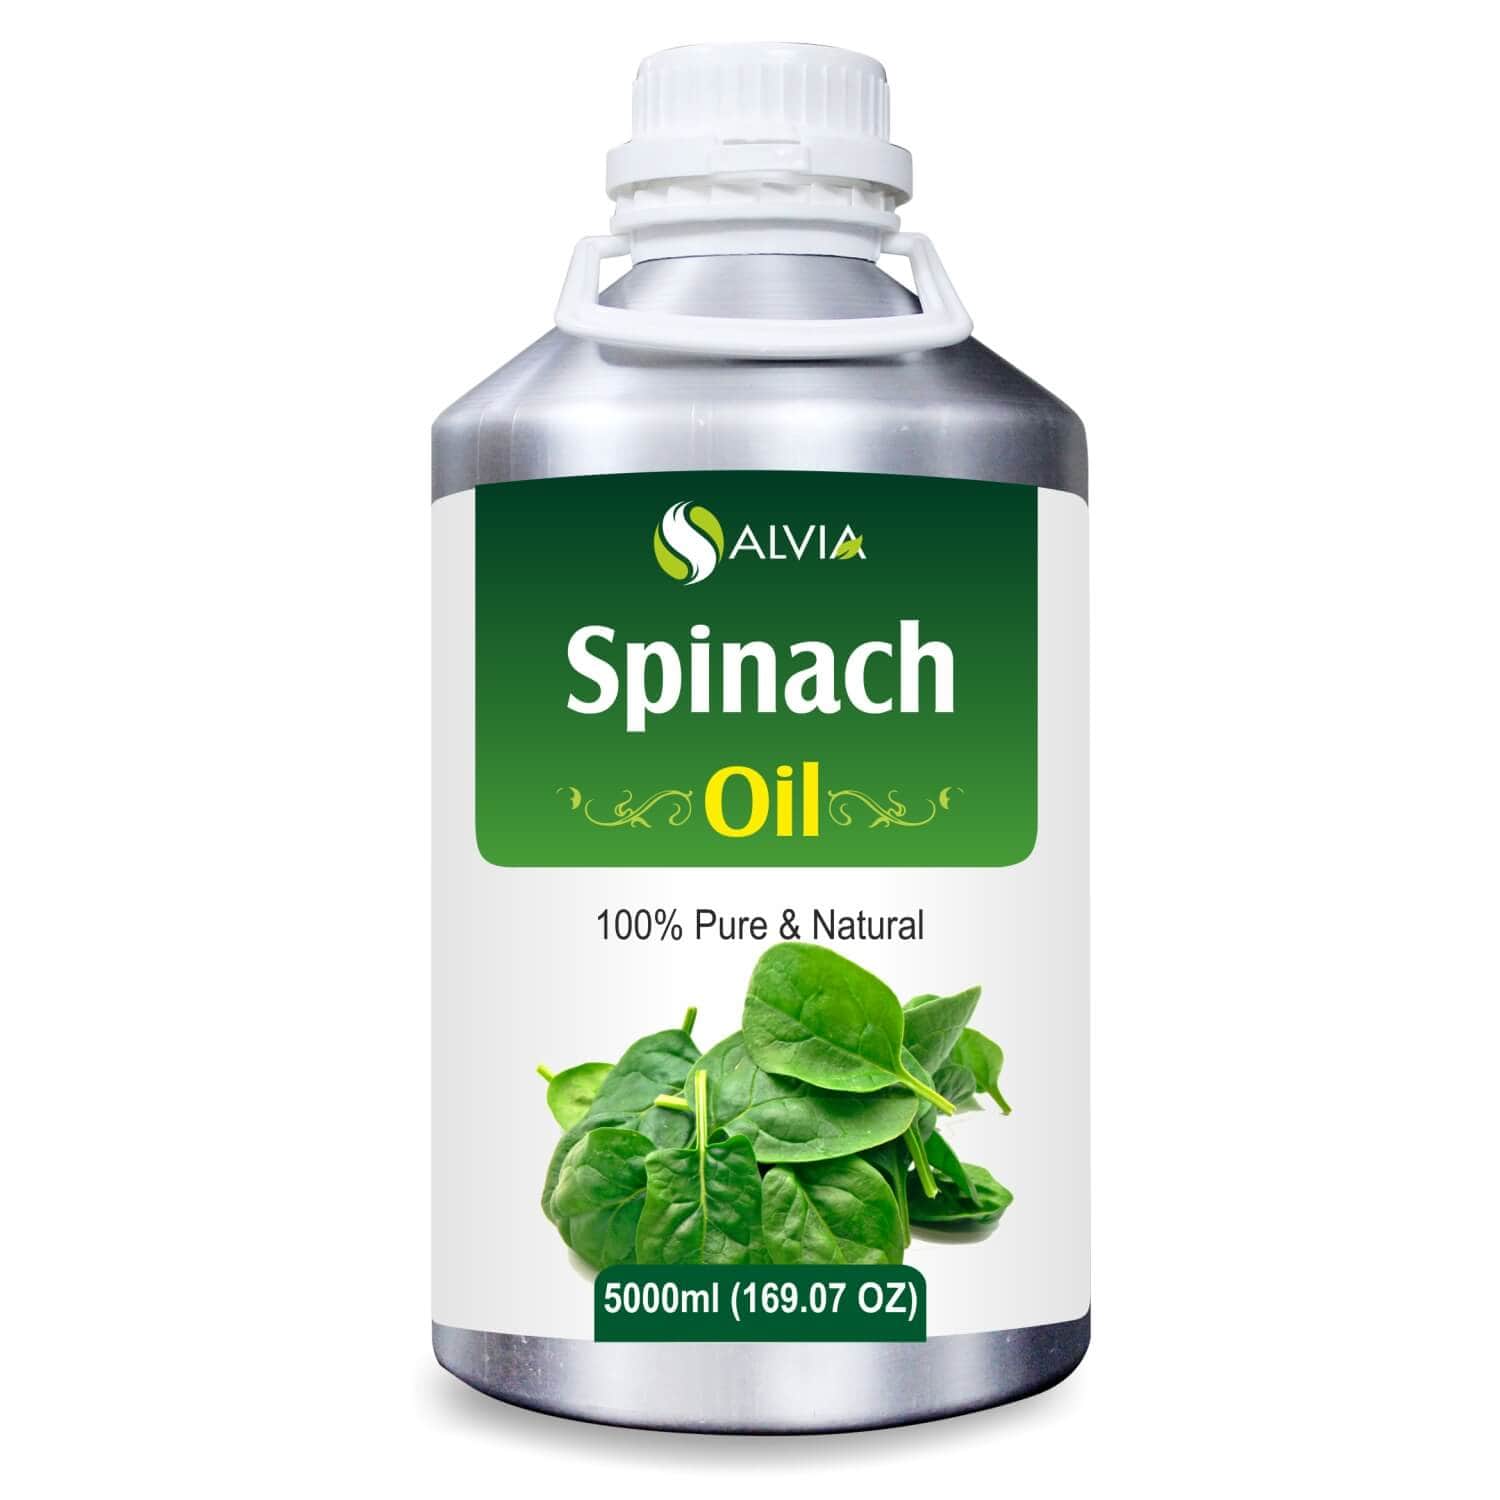 Salvia Natural Carrier Oils 5000ml Spinach Oil (Spinacia Oleracea) 100% Natural Pure Carrier Oil Moisturizes Skin & Hair, Promotes Hair Growth, High in Antioxidant, Reduces Scars & Acne